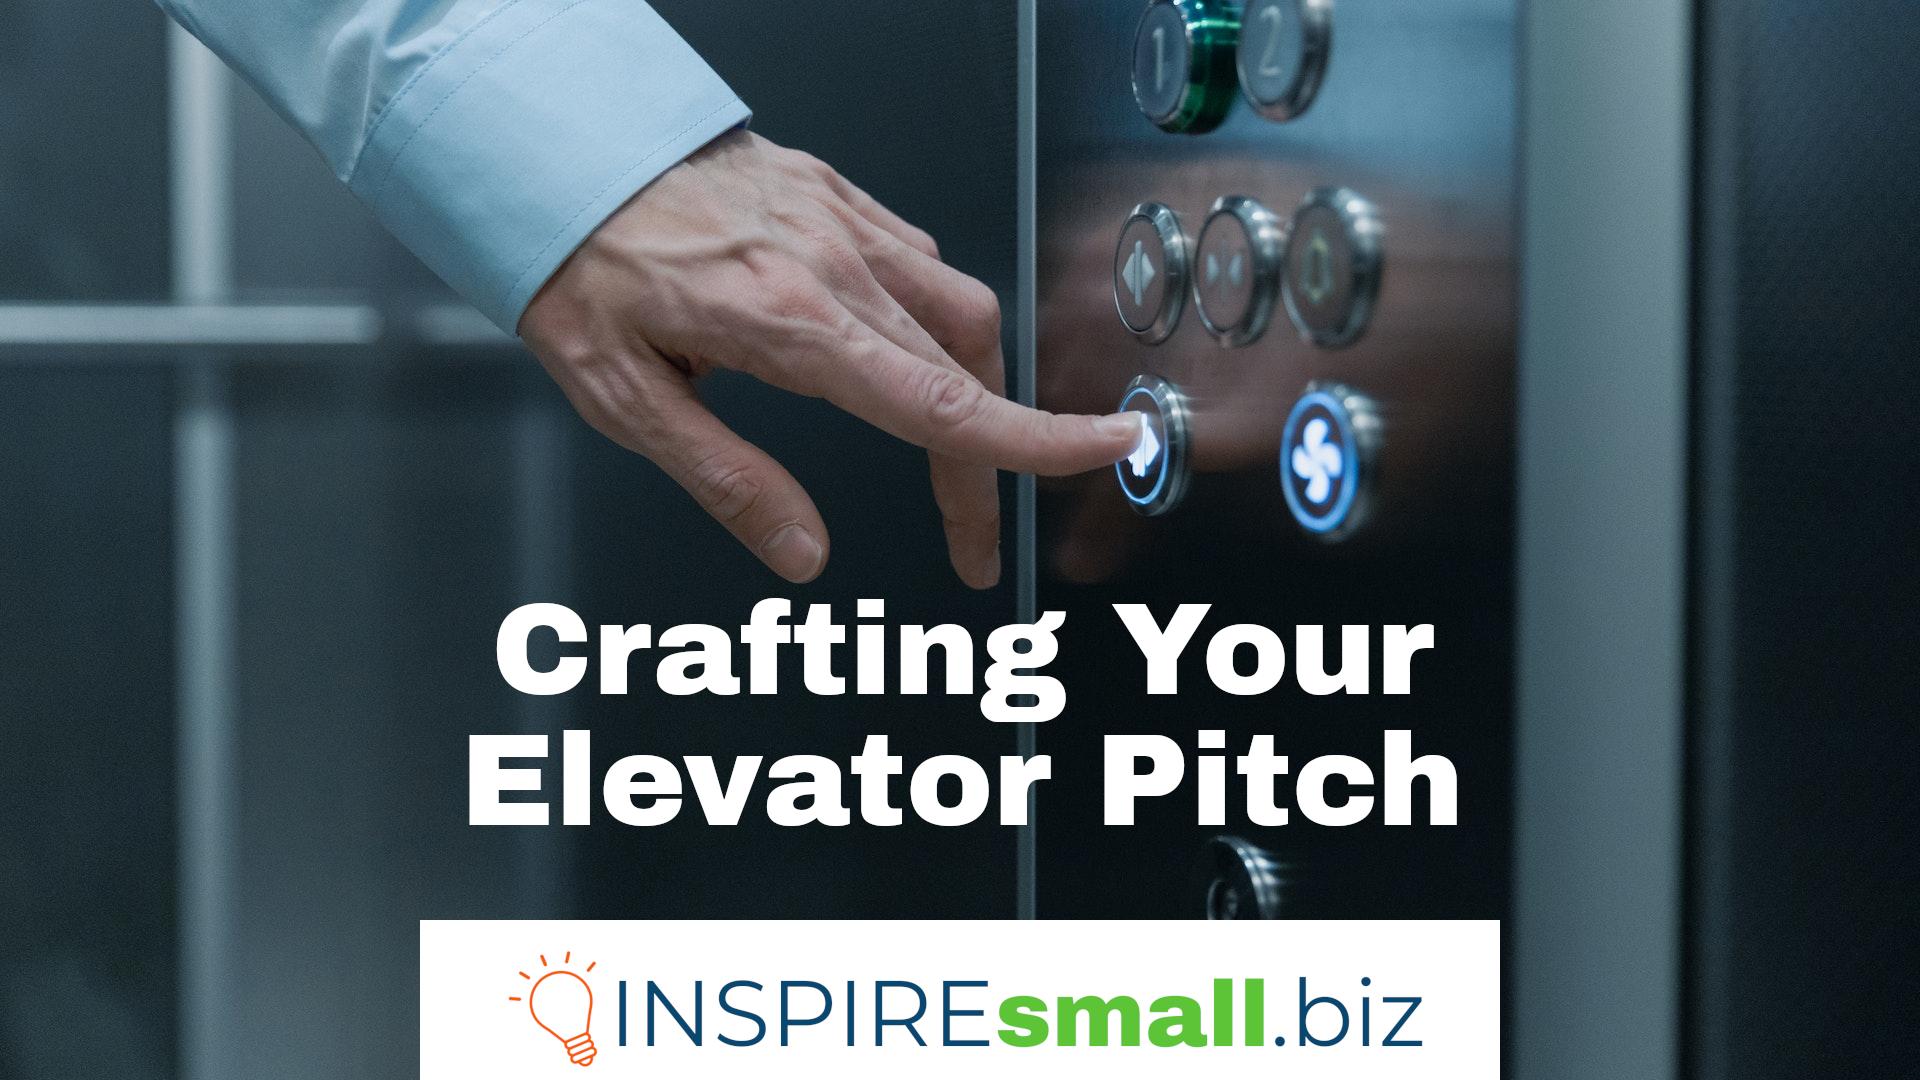 Crafting Your Elevator Pitch – Week of January 16, 2023 Events